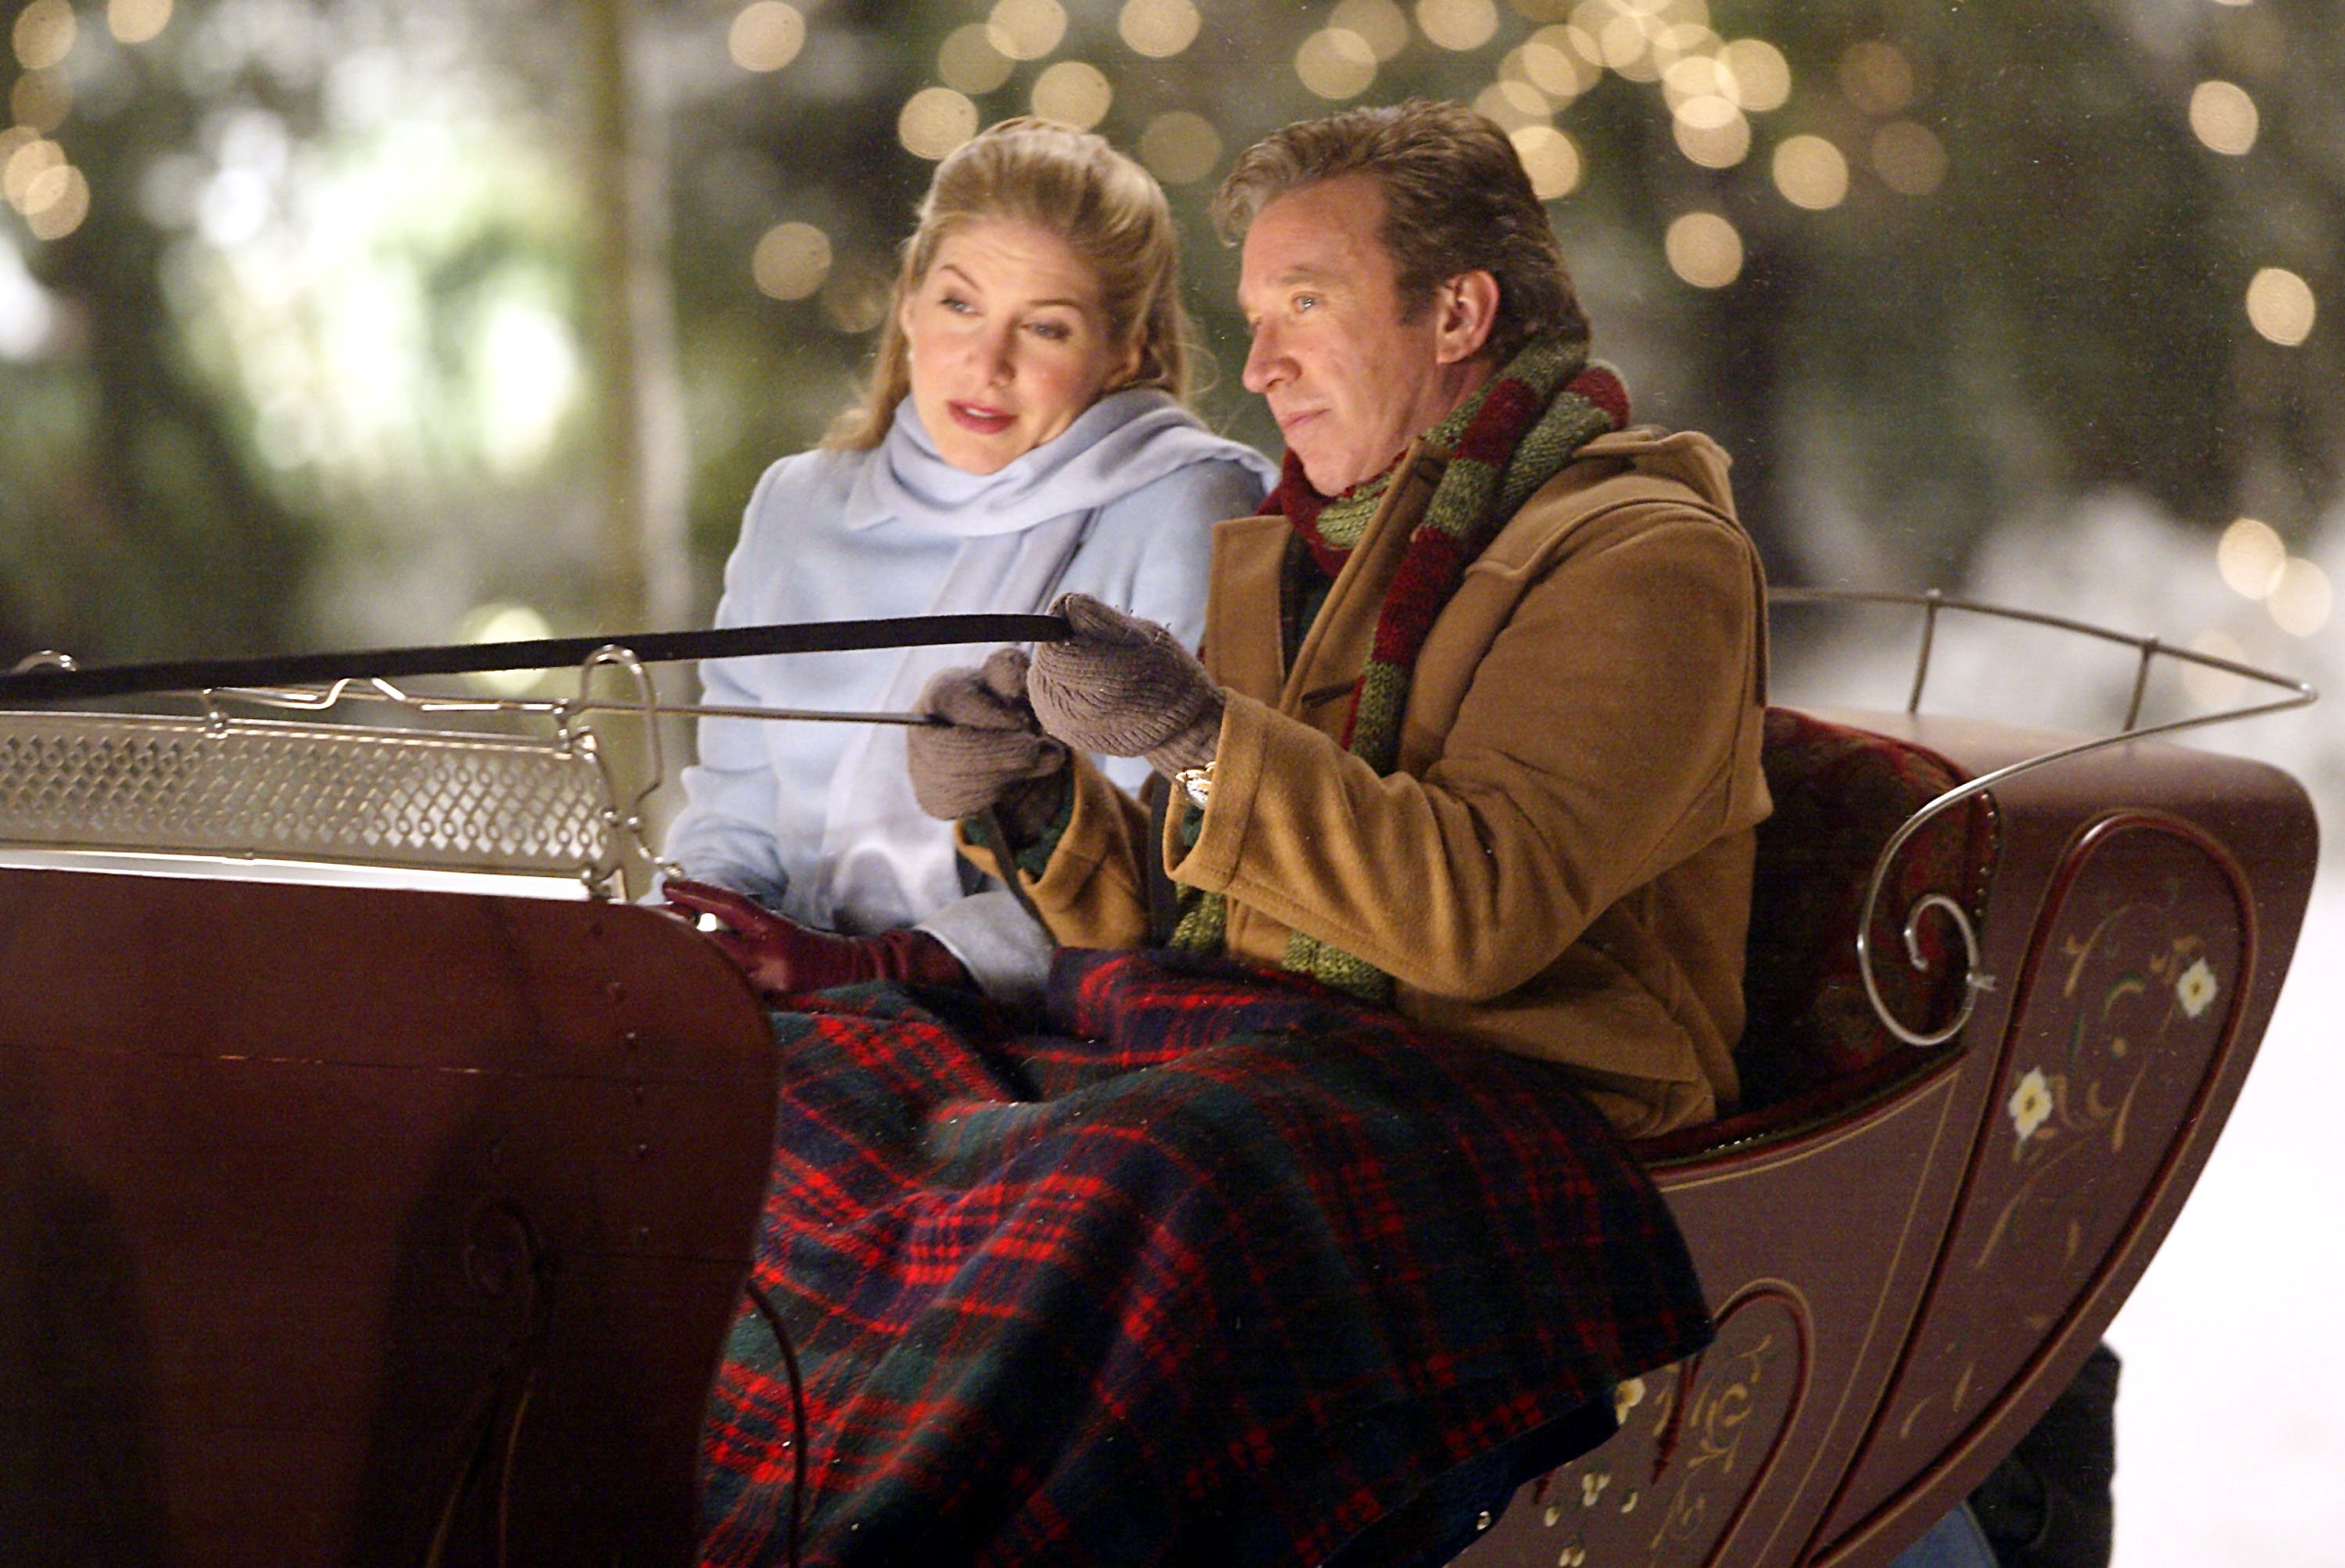 Actors Elizabeth Mitchell and Tim Allen act in a scene on the set of their film, 'Mrs. Clause: The Santa Clause 2'